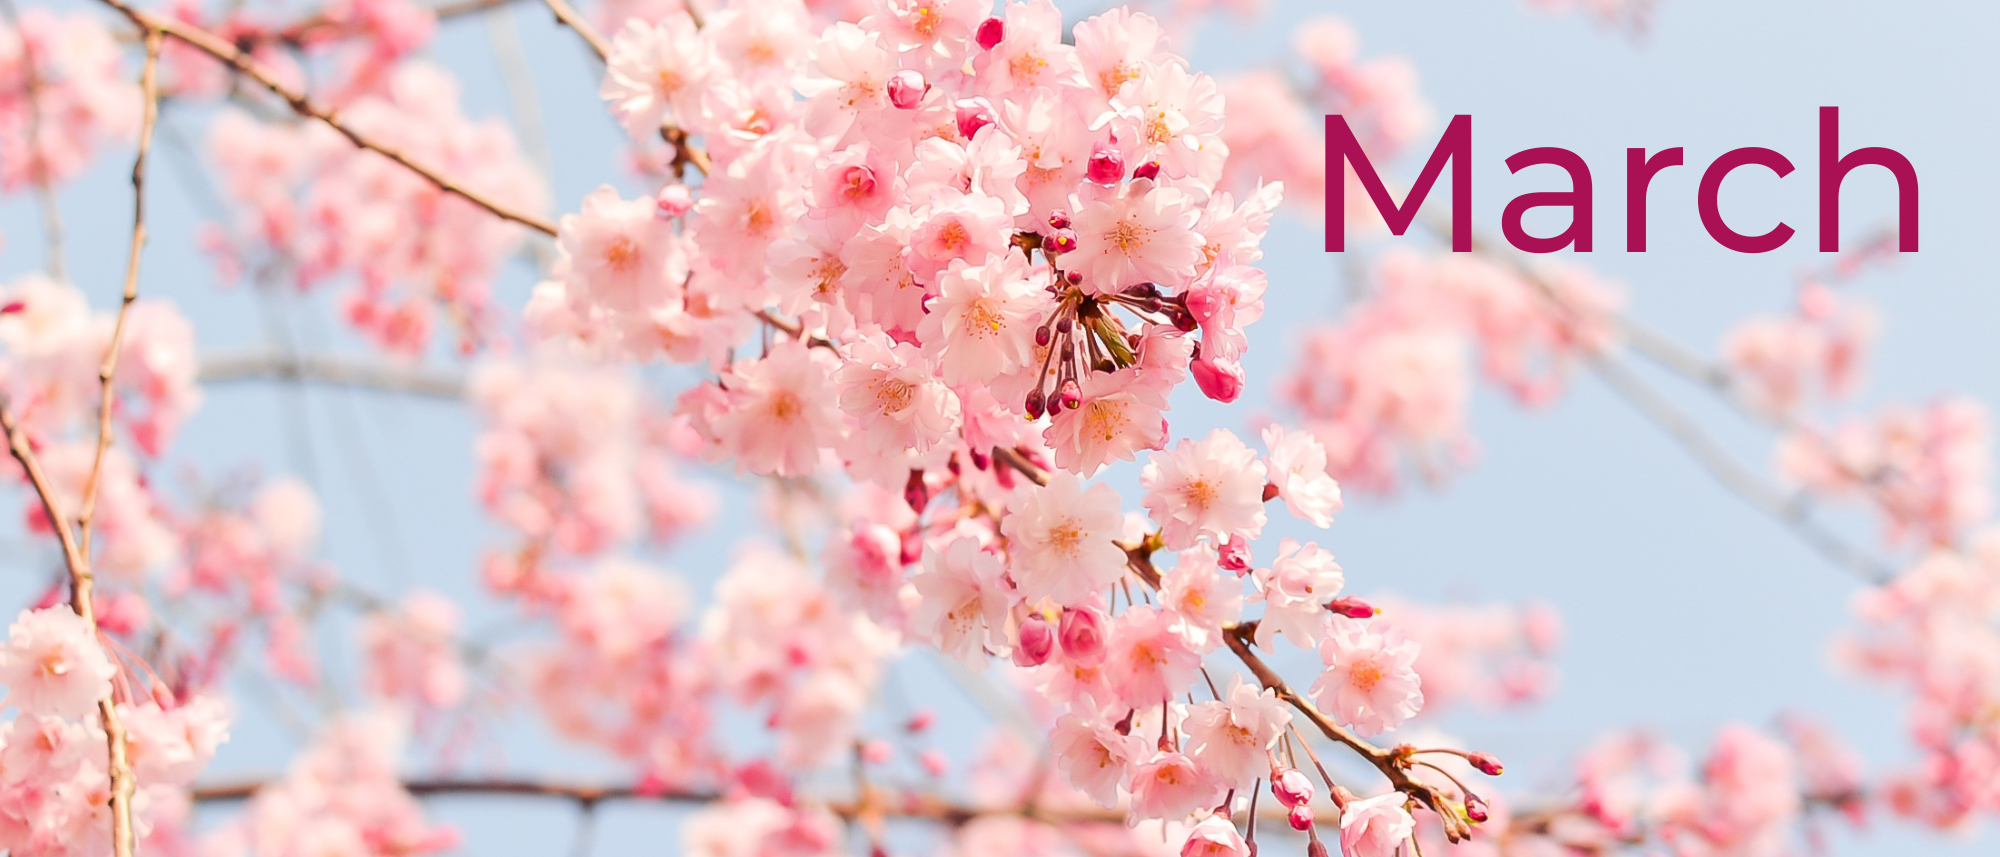 Text says March, on a cherry blossom tree background.